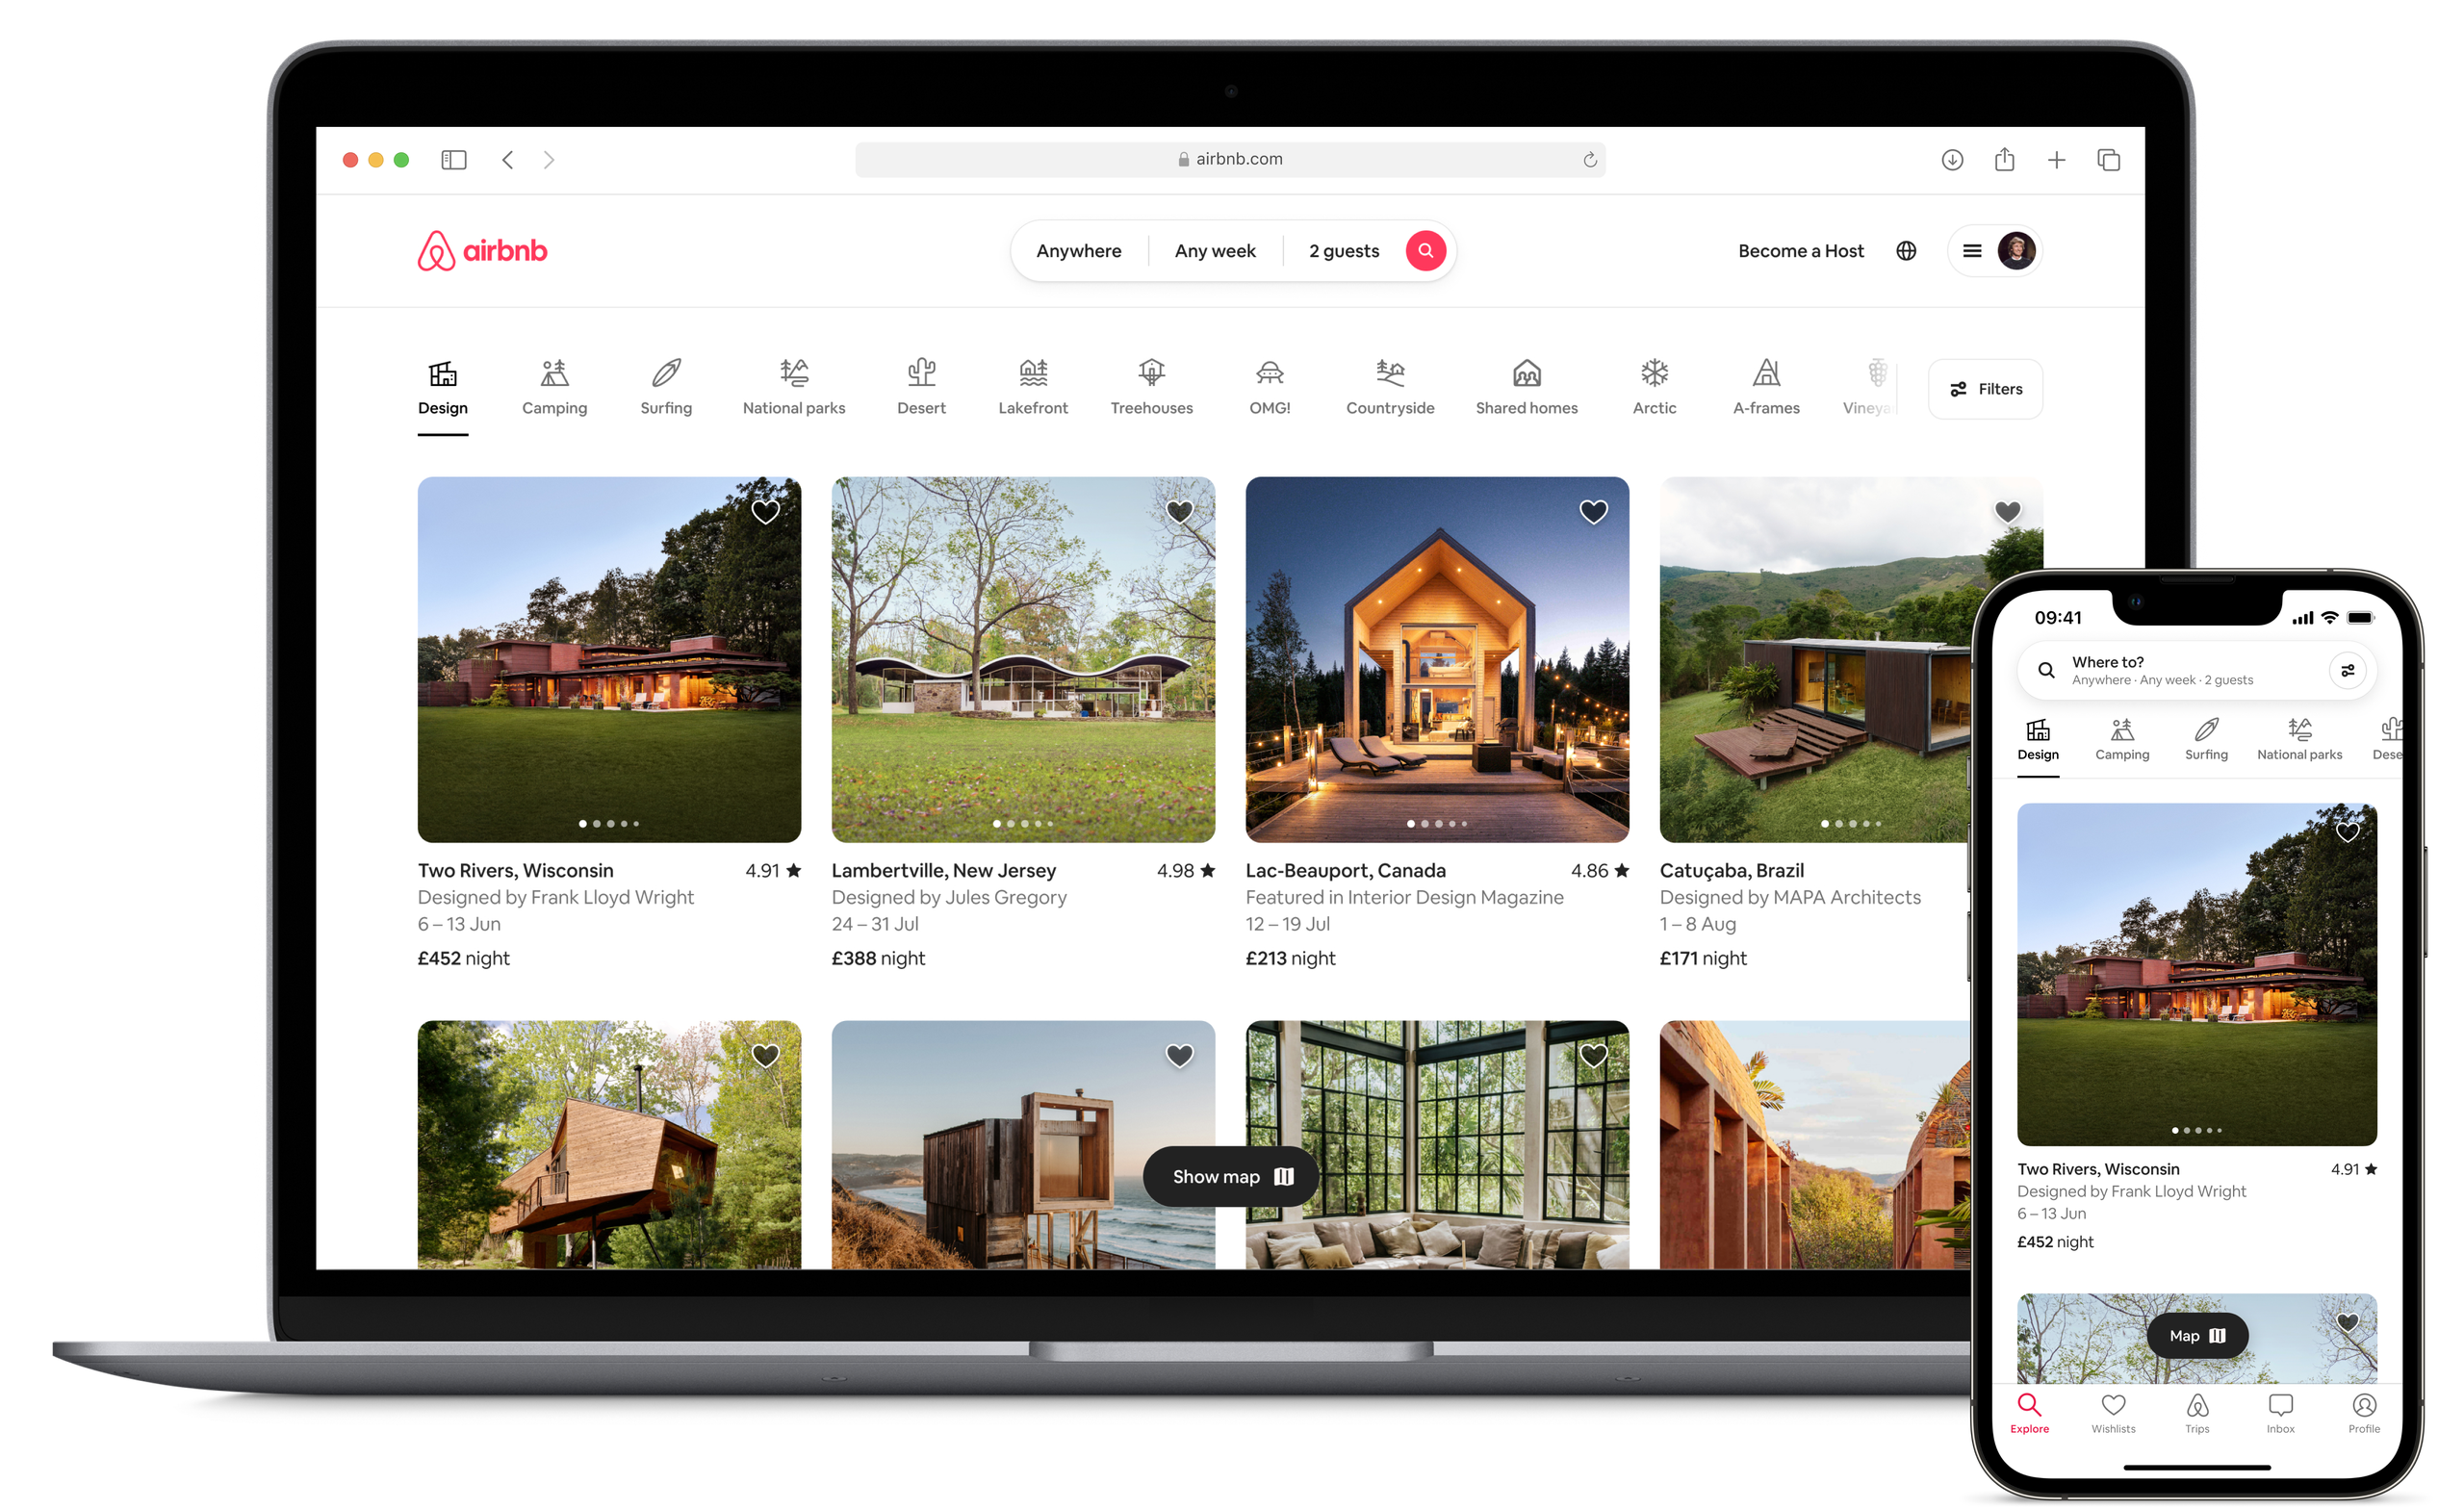 An open laptop and a mobile phone display the new Airbnb homepage, where listing photos from Airbnb’s Design Category are displayed. A row of icons along the top of the page showcase the different categories a guest can explore.